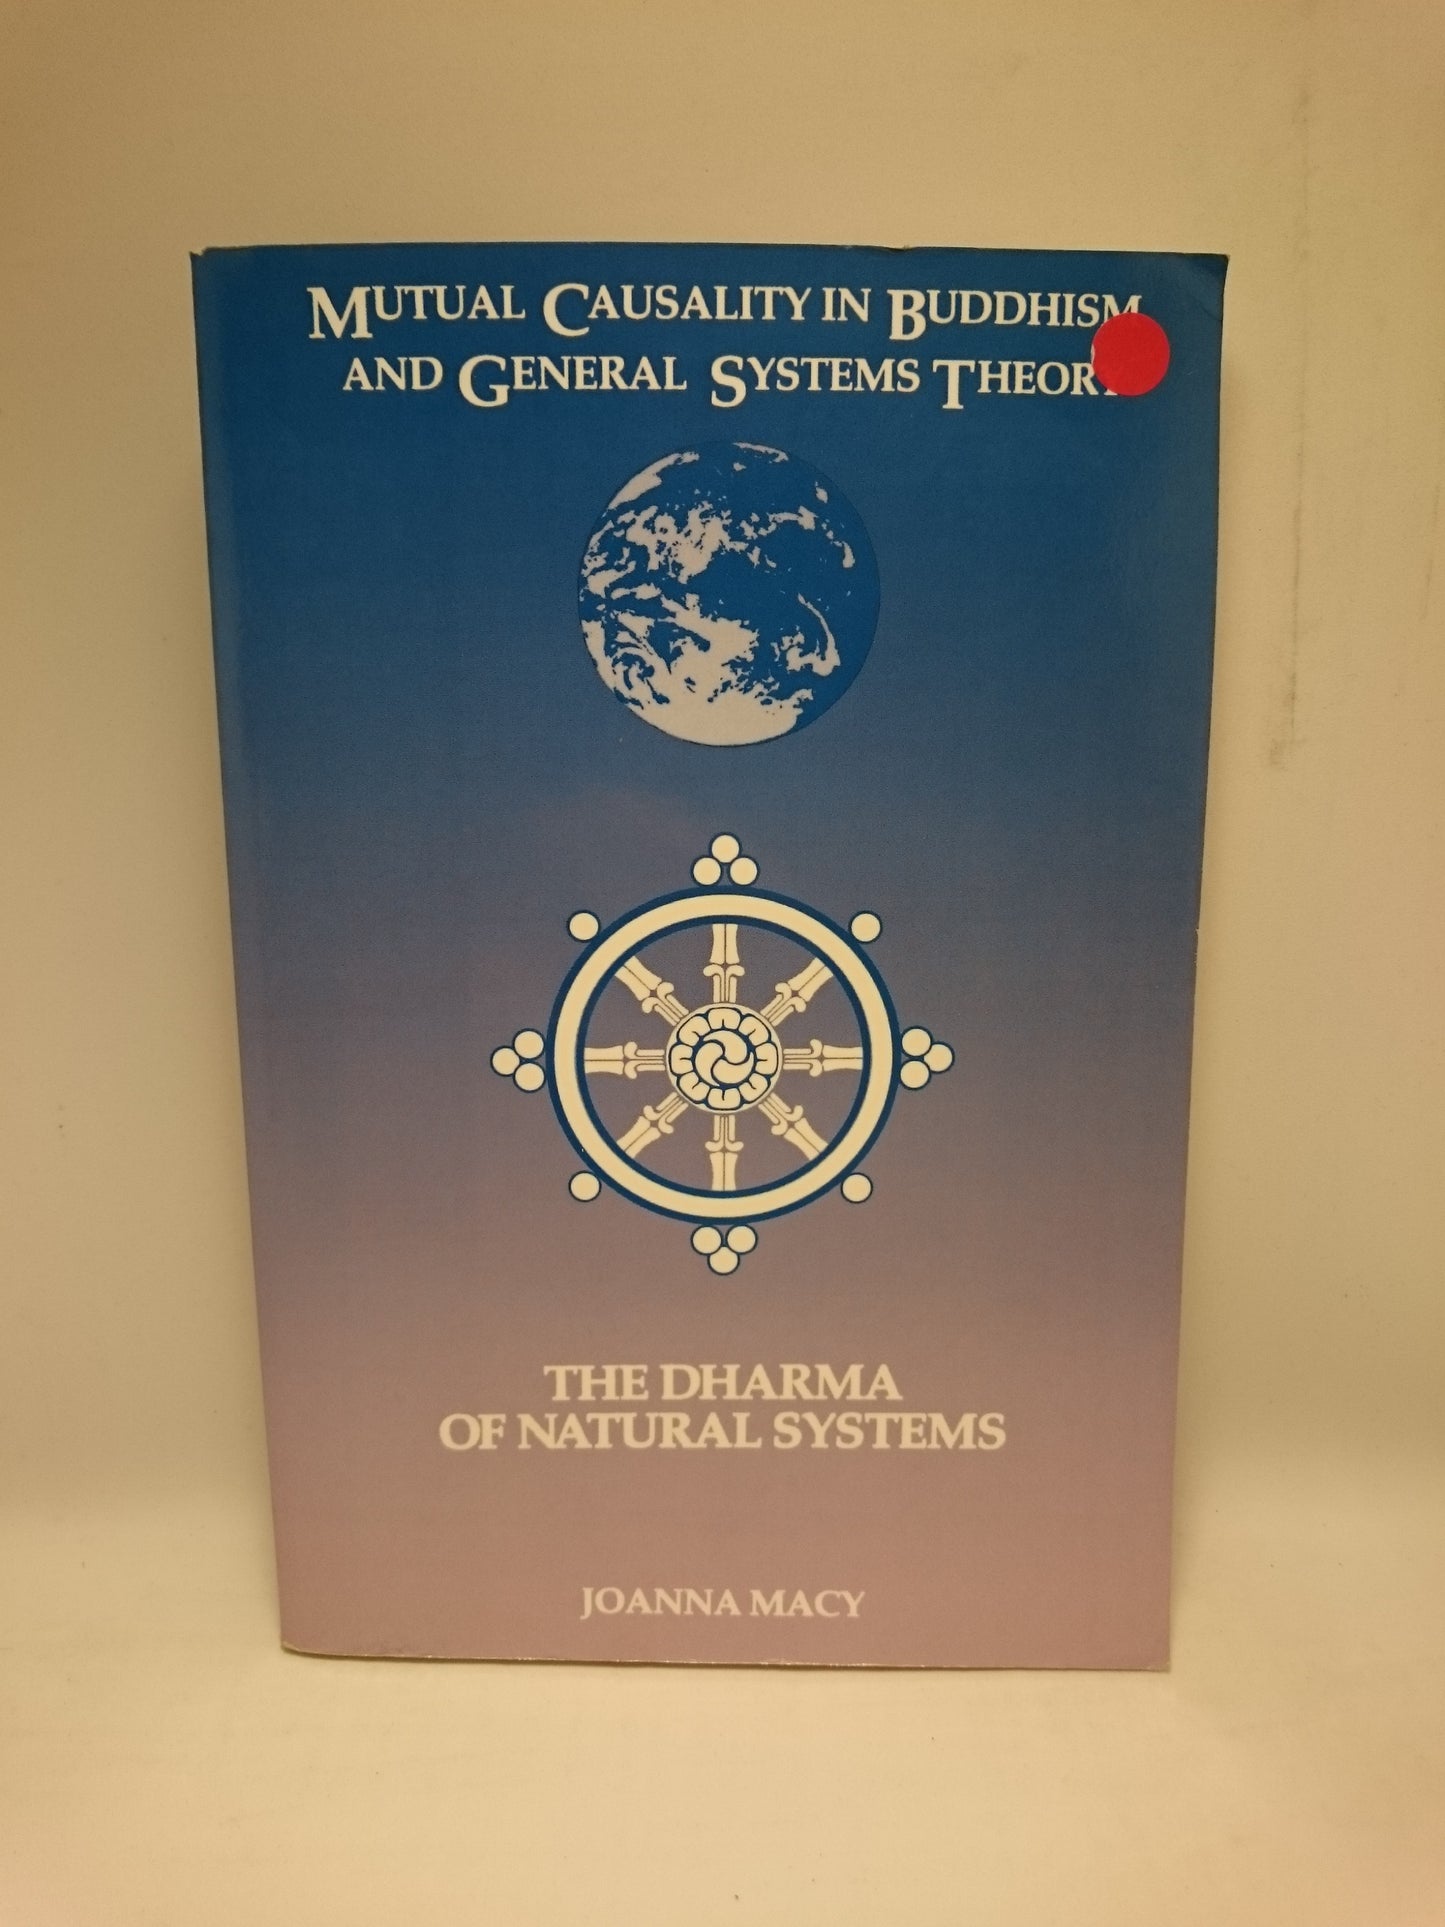 Mutual Causality in Buddhism and General Systems Theory